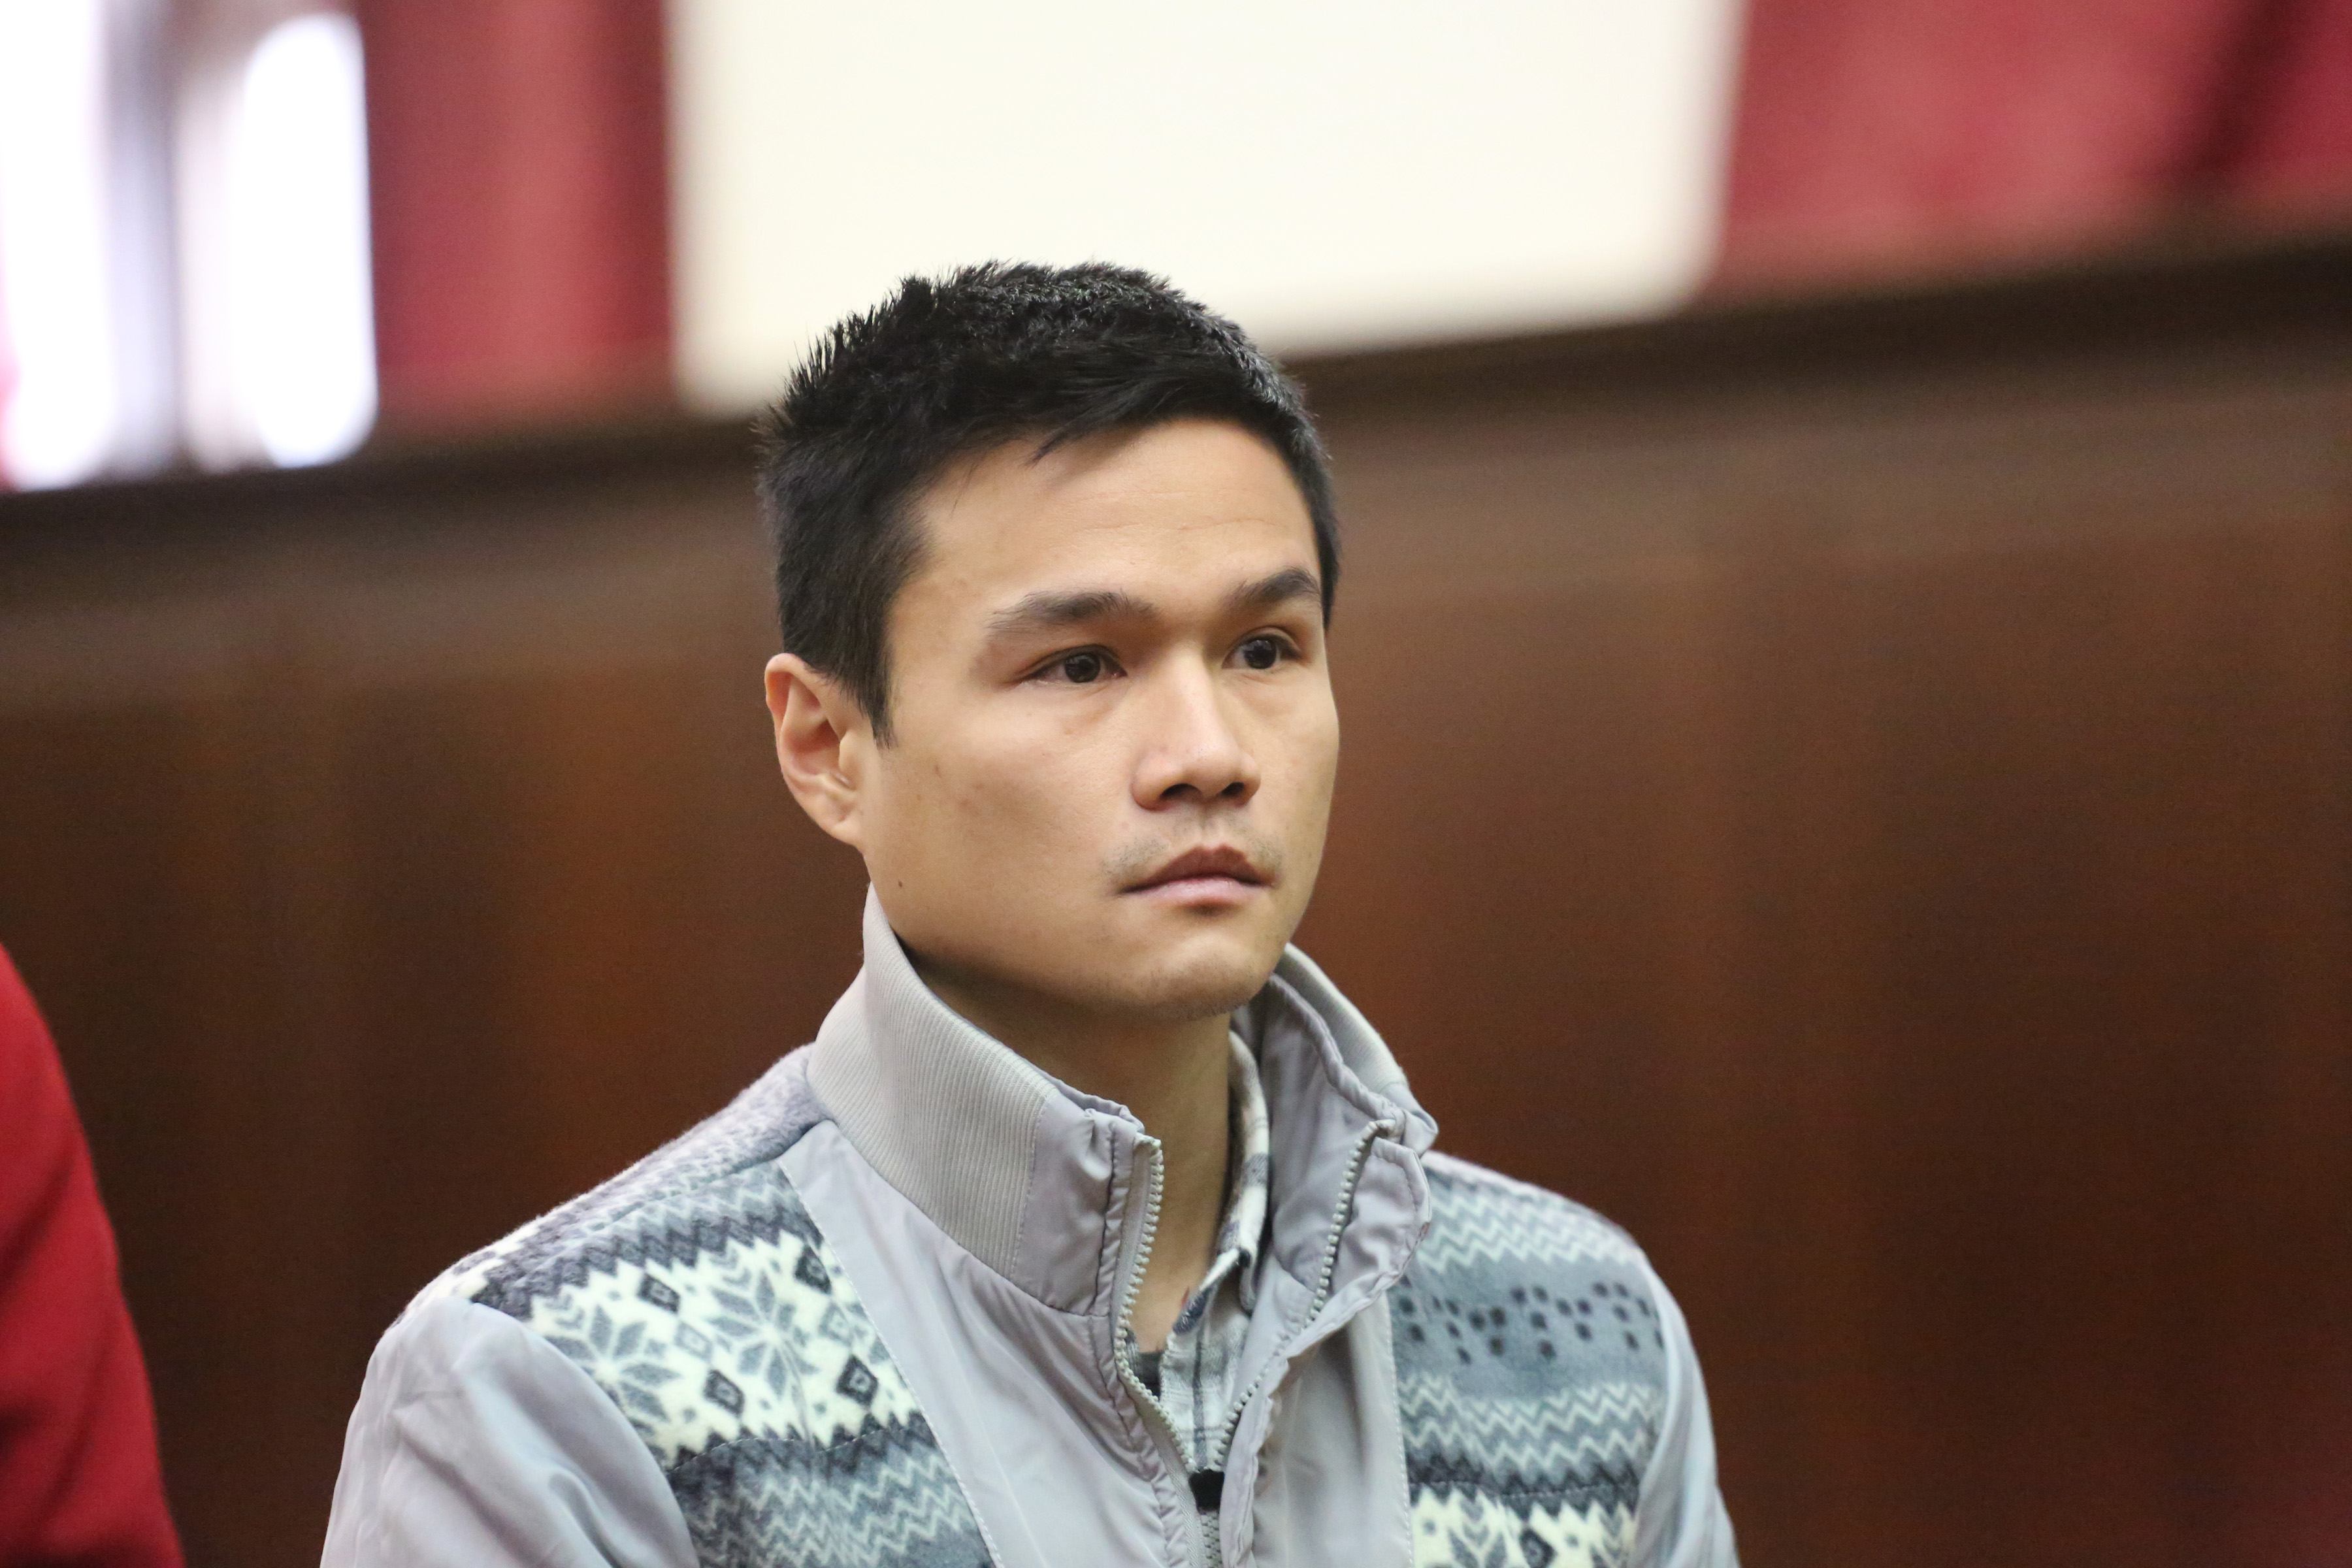 Francis Salud, 28, appearing at his arraignment in Manhattan Criminal Court on Fri., Jan. 22. Salud is accused of a random slashing in the East Village on Sat., Jan 16, that left a man needing 150 stitches to close a gash on the side of his face. Photo by Jefferson Siegel